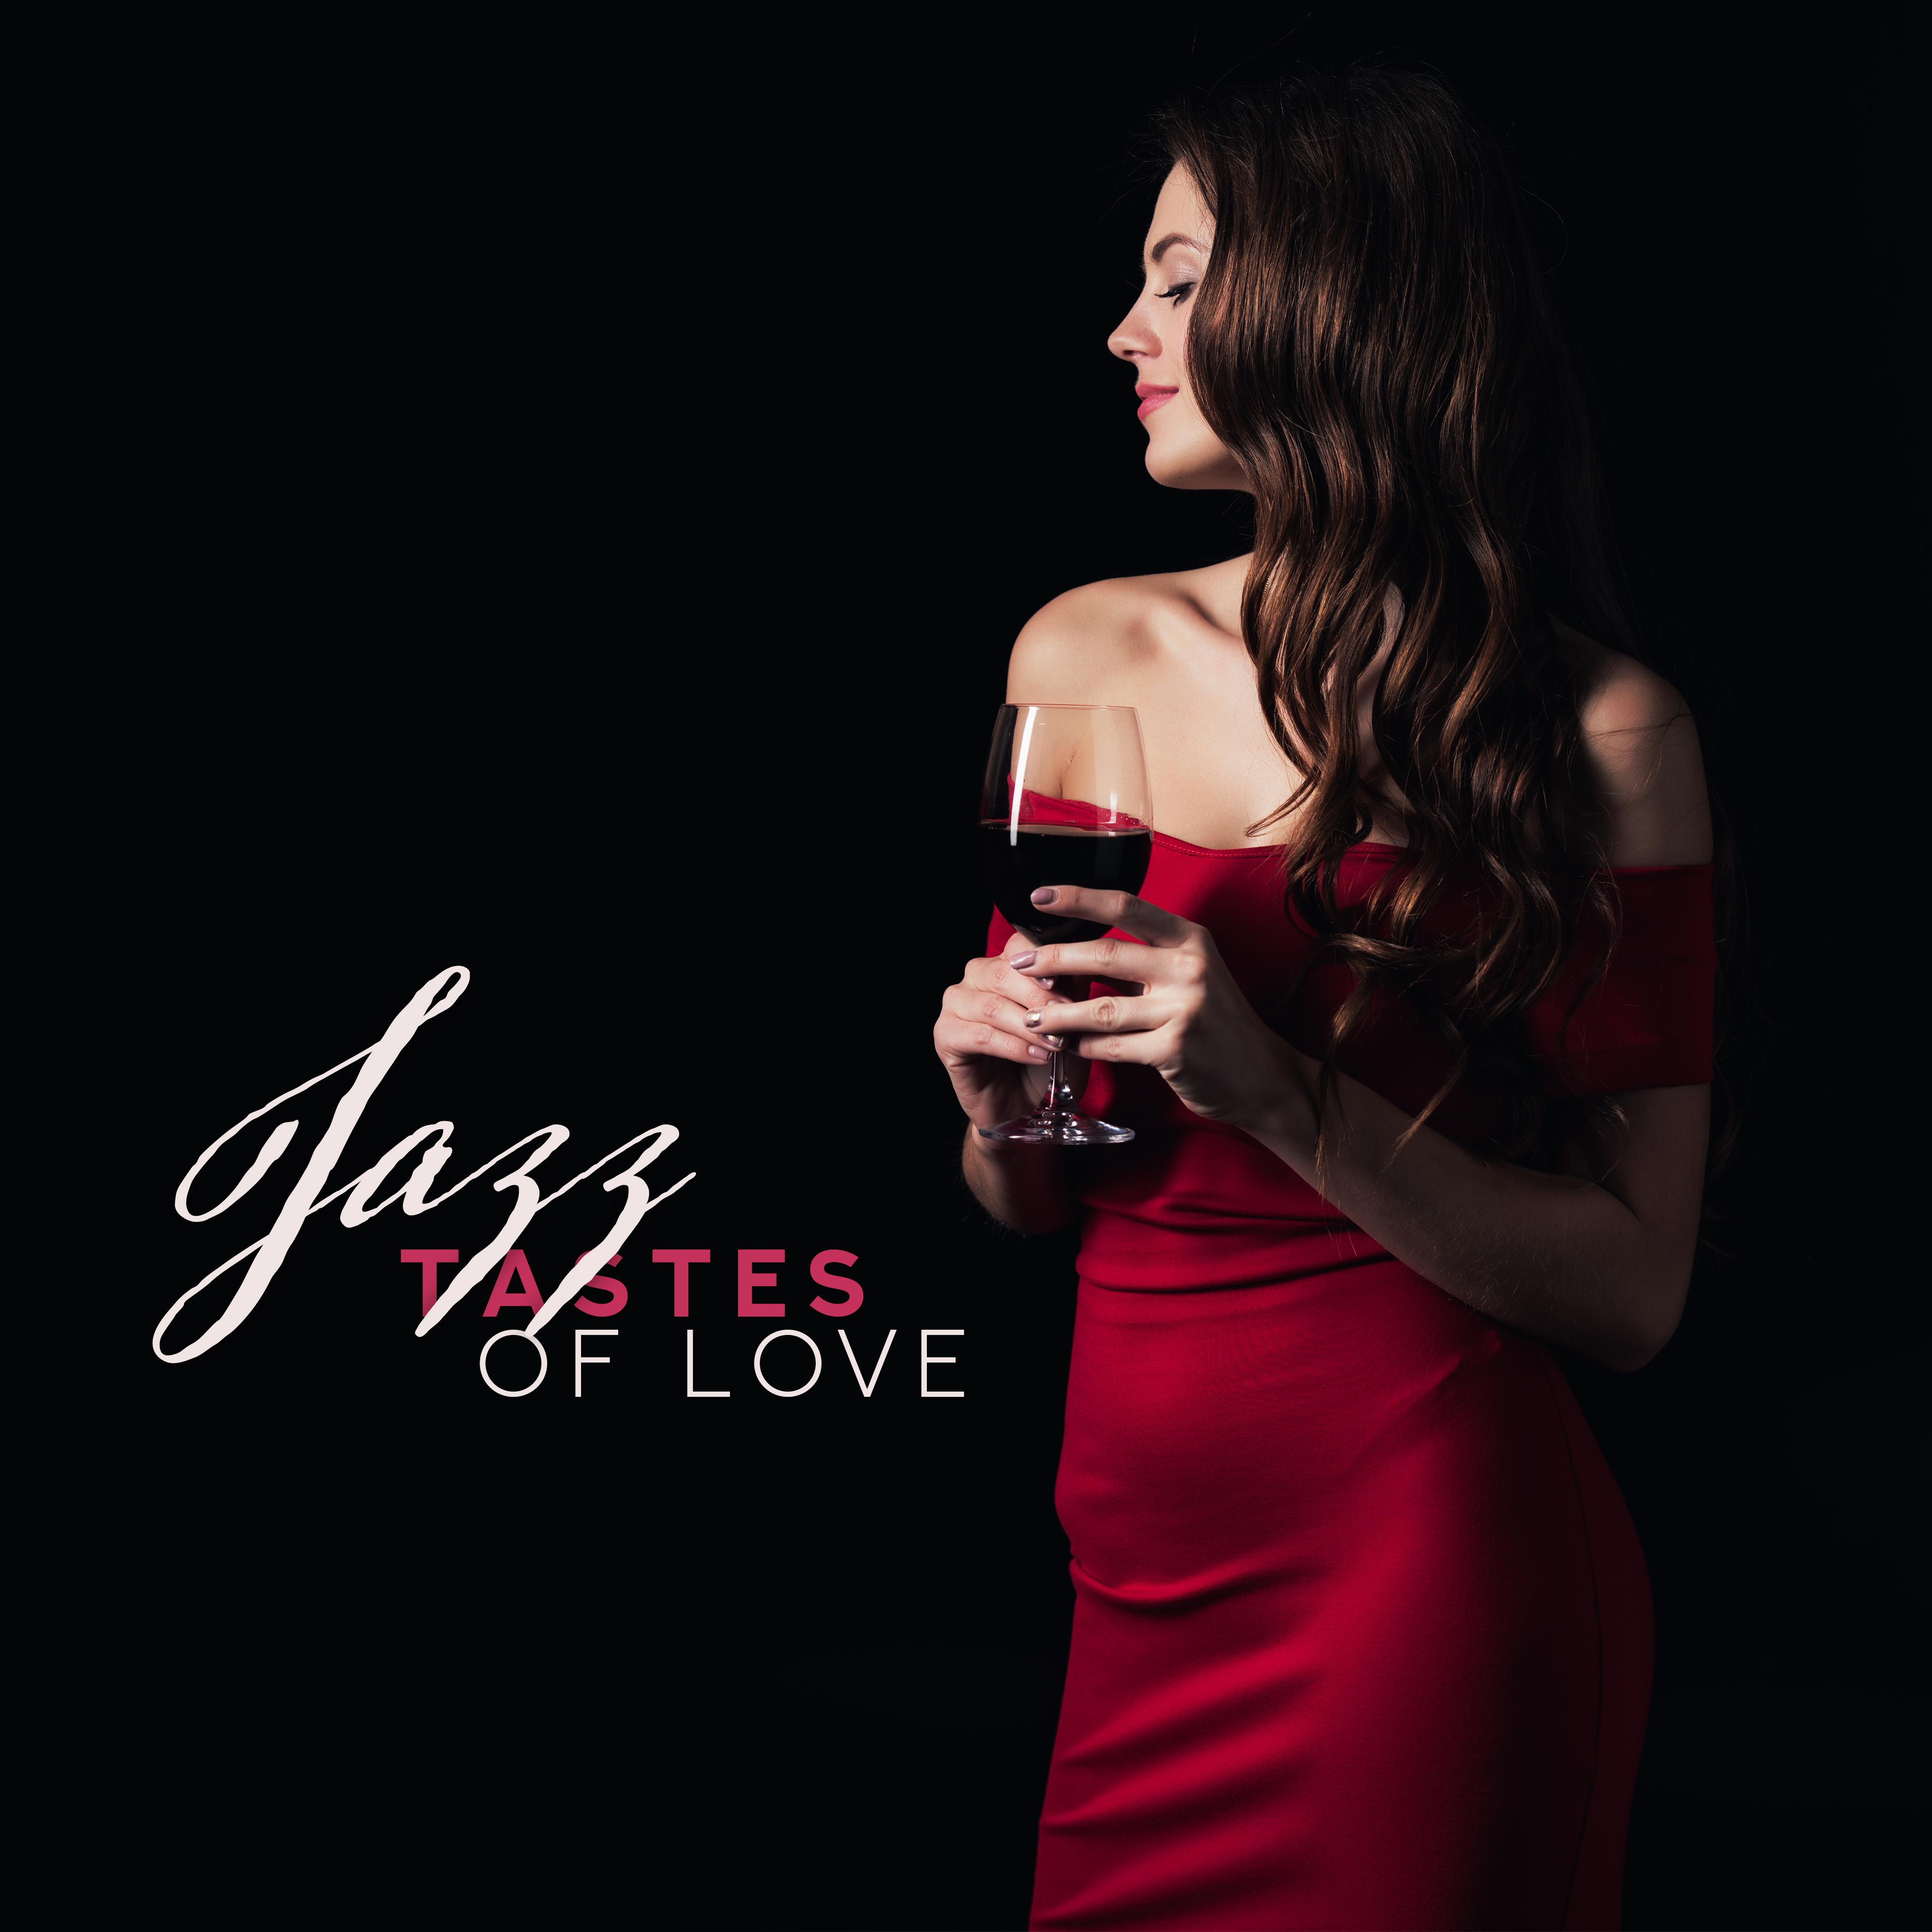 Jazz Tastes of Love: Collection of Very Romantic Smooth Jazz 2019 Music for Couple' s, Background for Spending Perfect Evening Together, Anniversary Dinner Time, Hot Night Full of Sex  Calm Romantic Morning